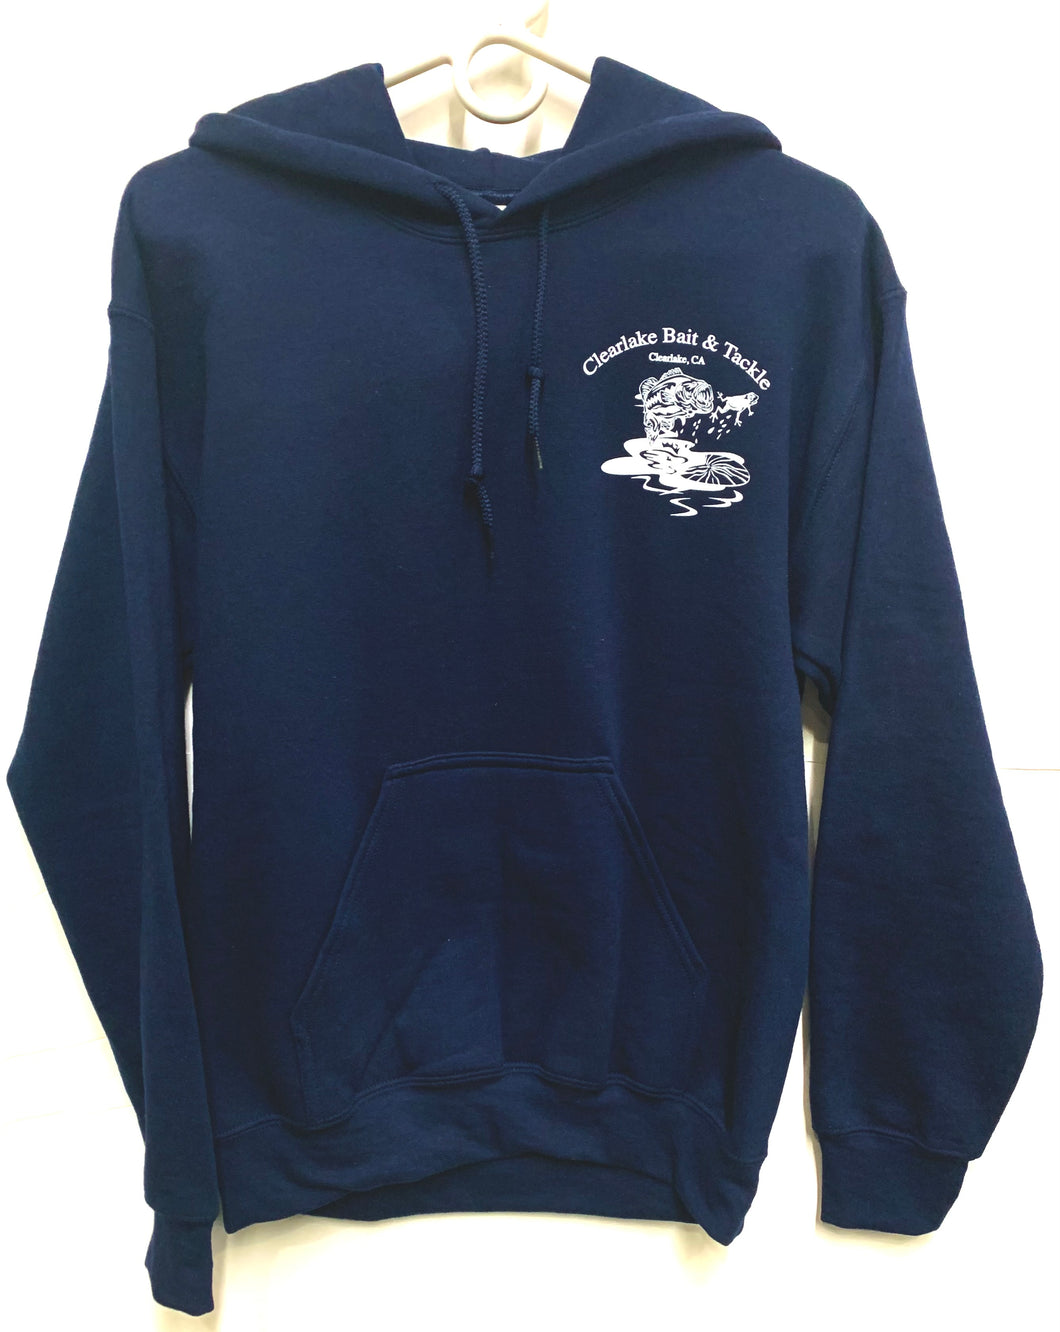 Clearlake Bait & Tackle Hoody-Navy